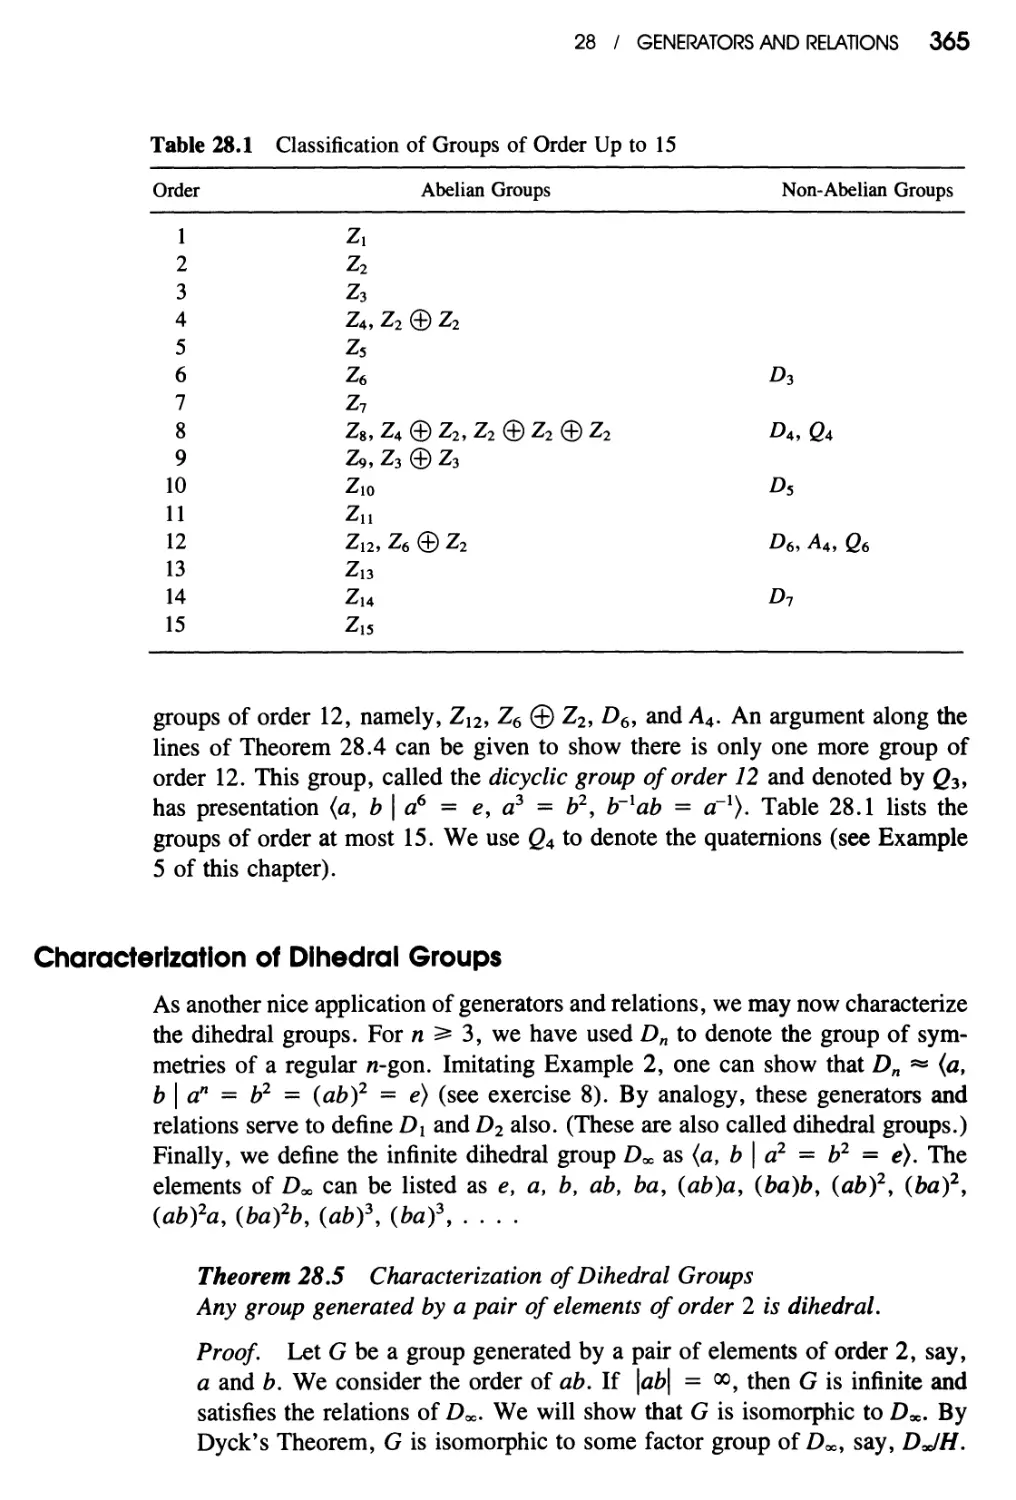 Characterization of Dihedral Groups